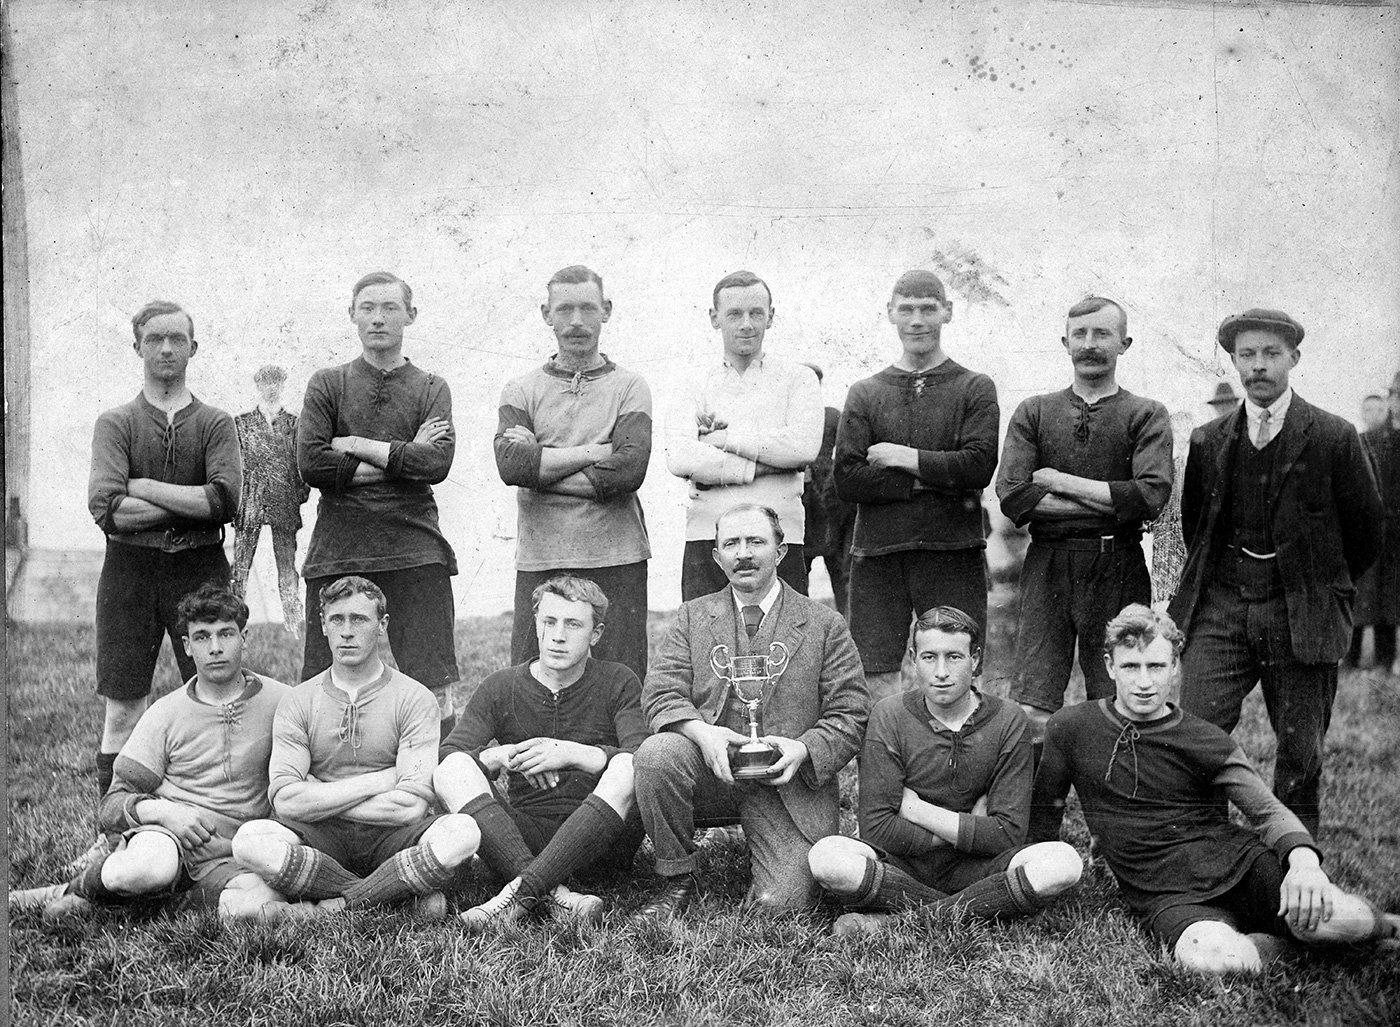 Swanage Football team early 1900s